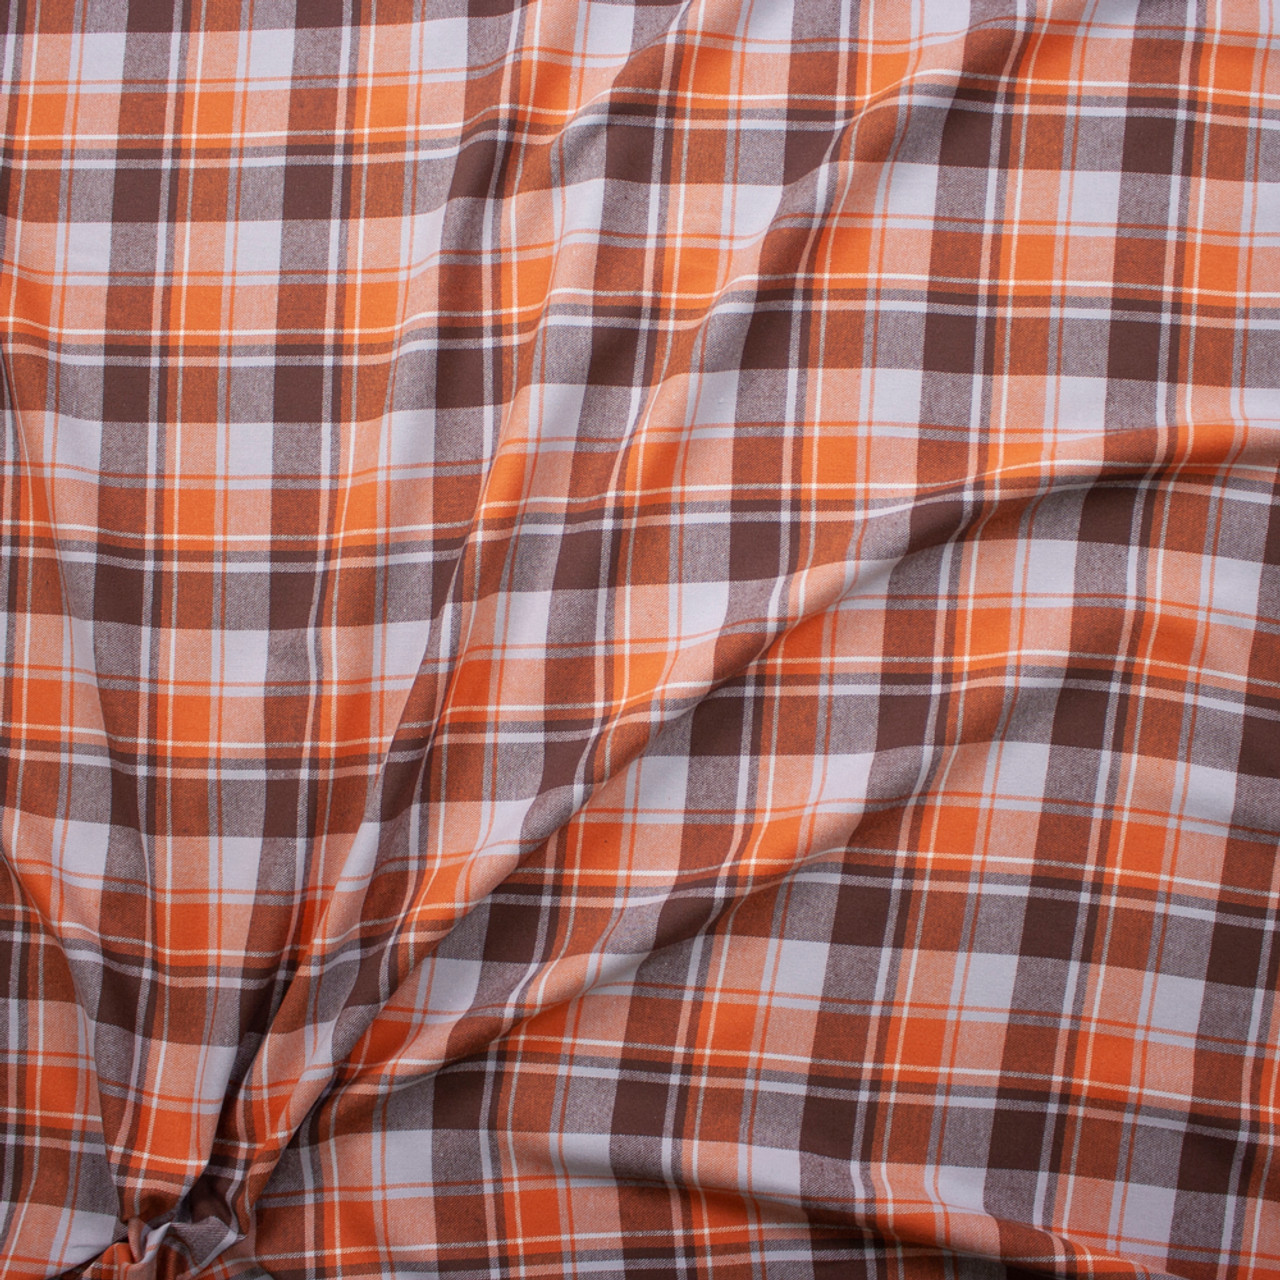 Flannel Fabric - Orange Rust Plaid - By the Yard - 100% Cotton Flannel